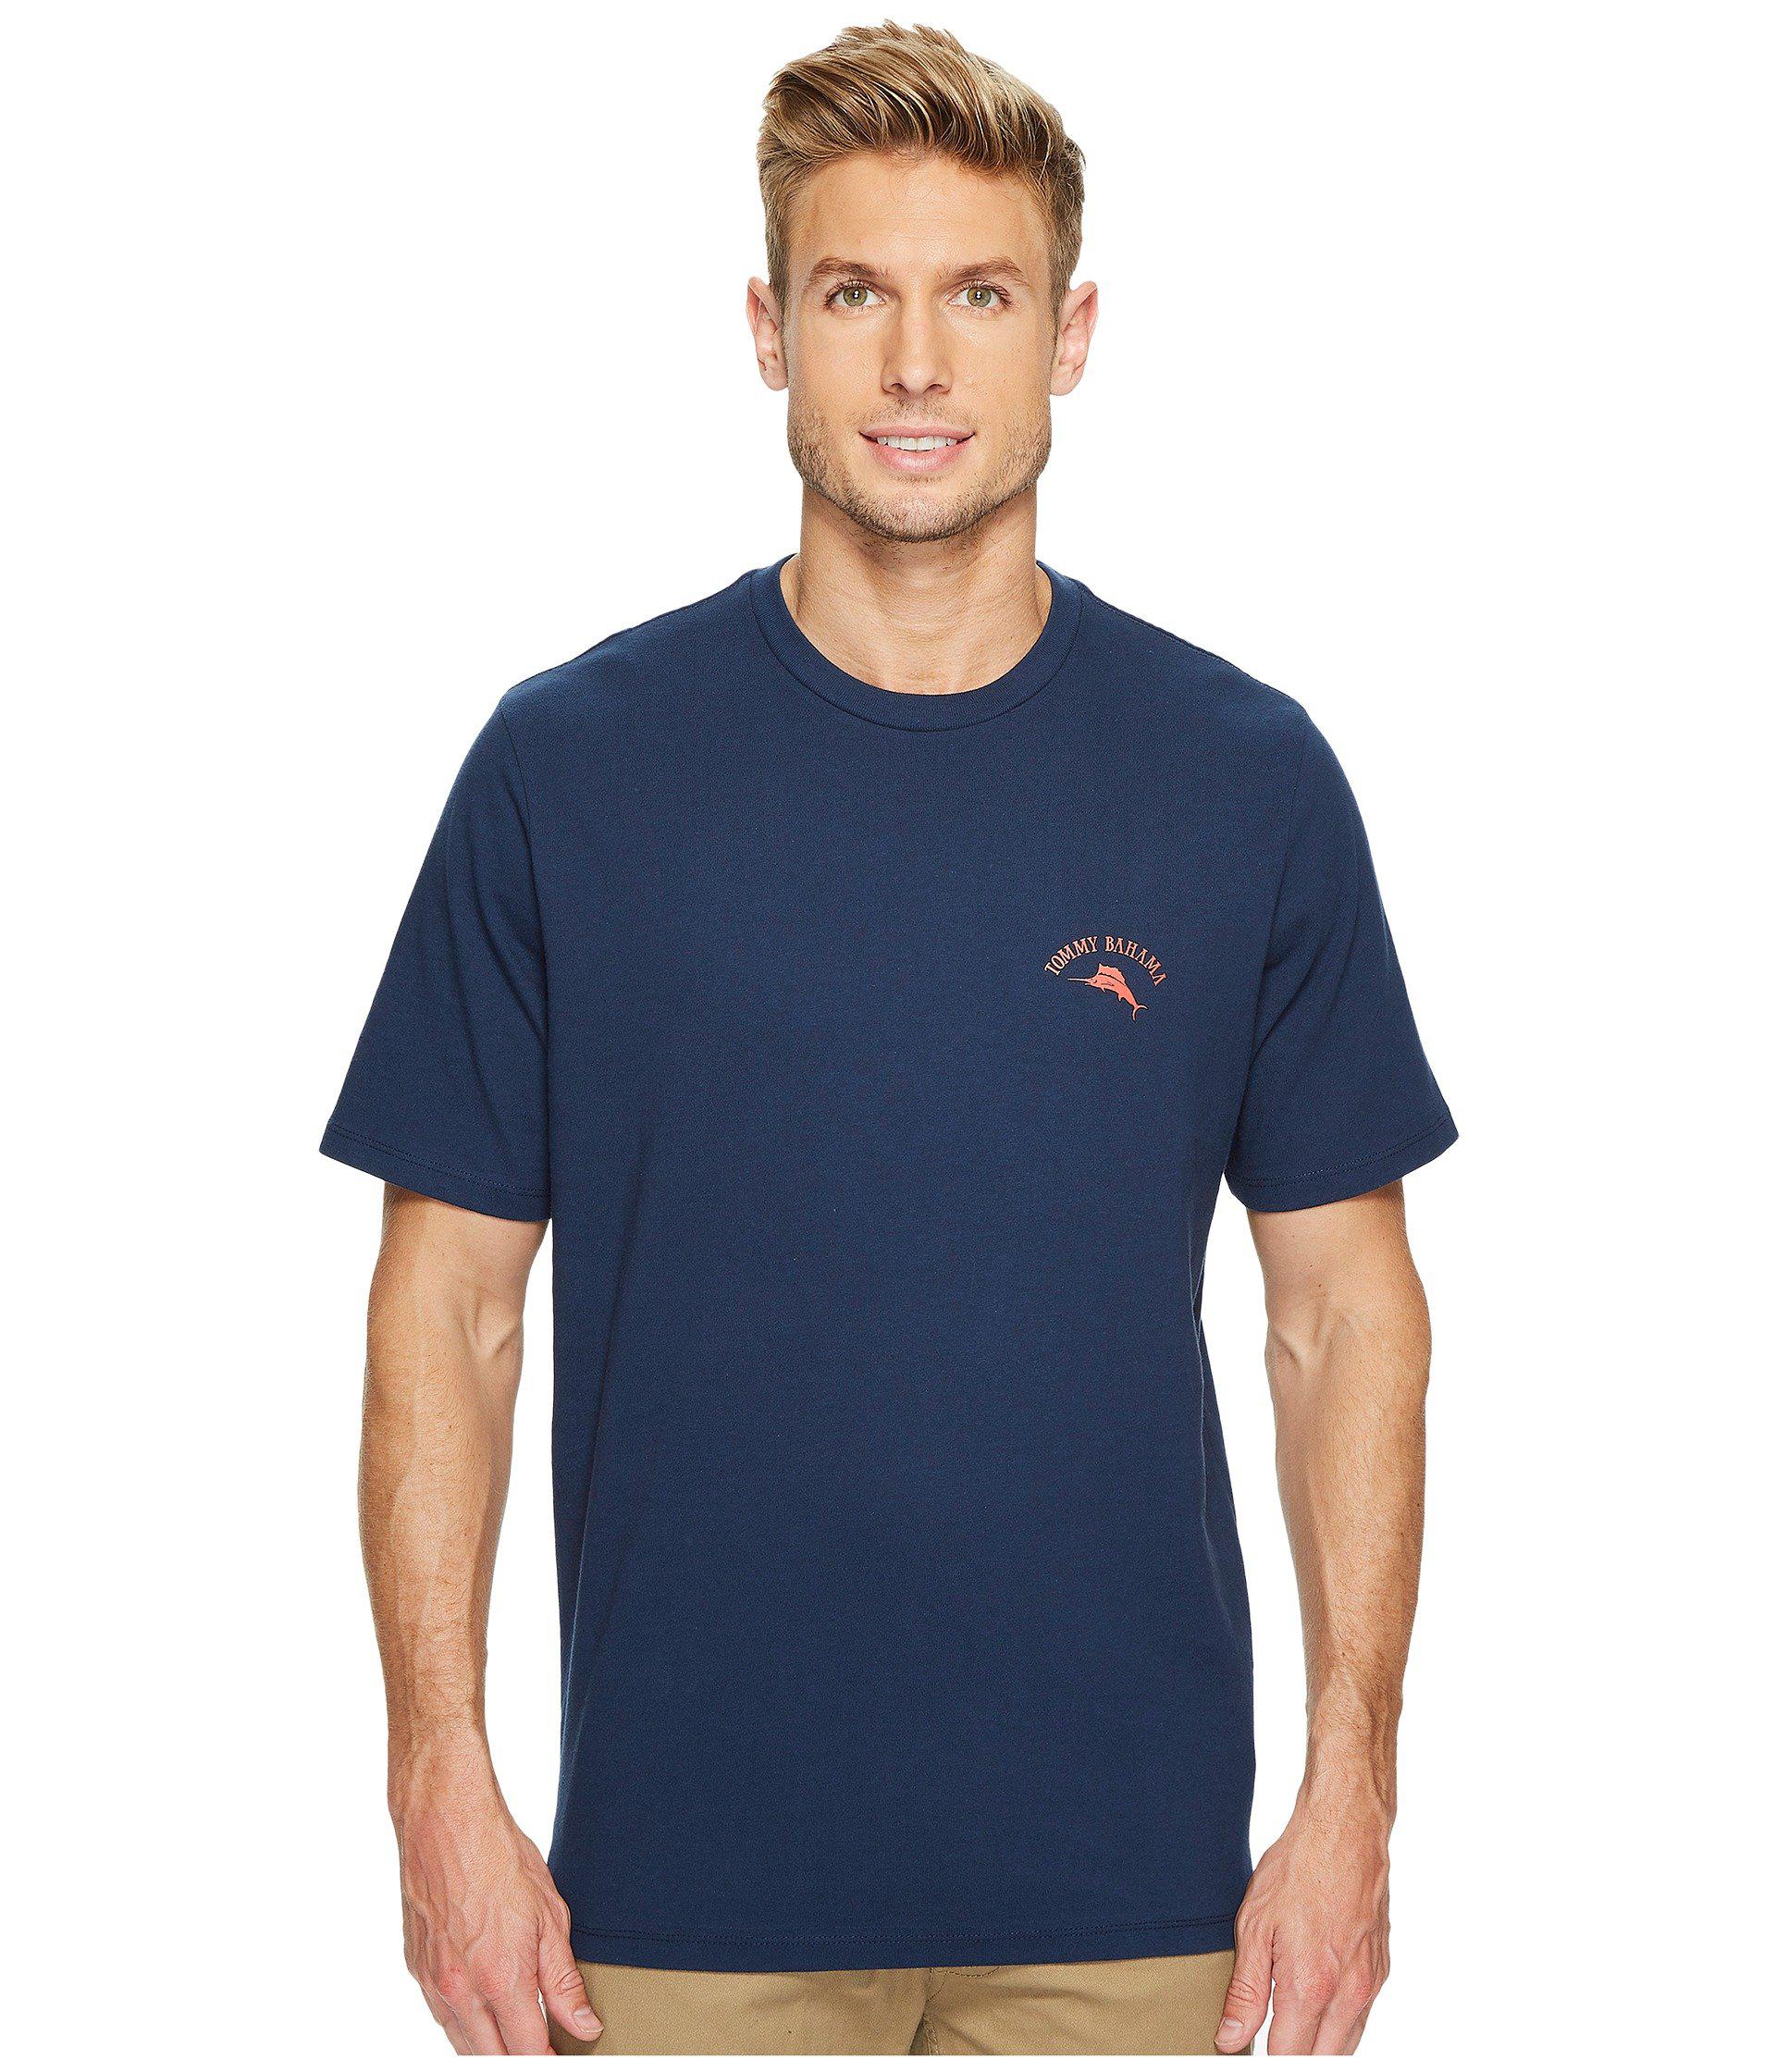 Tommy Bahama Cotton Big Boats T-shirt in Blue for Men - Lyst